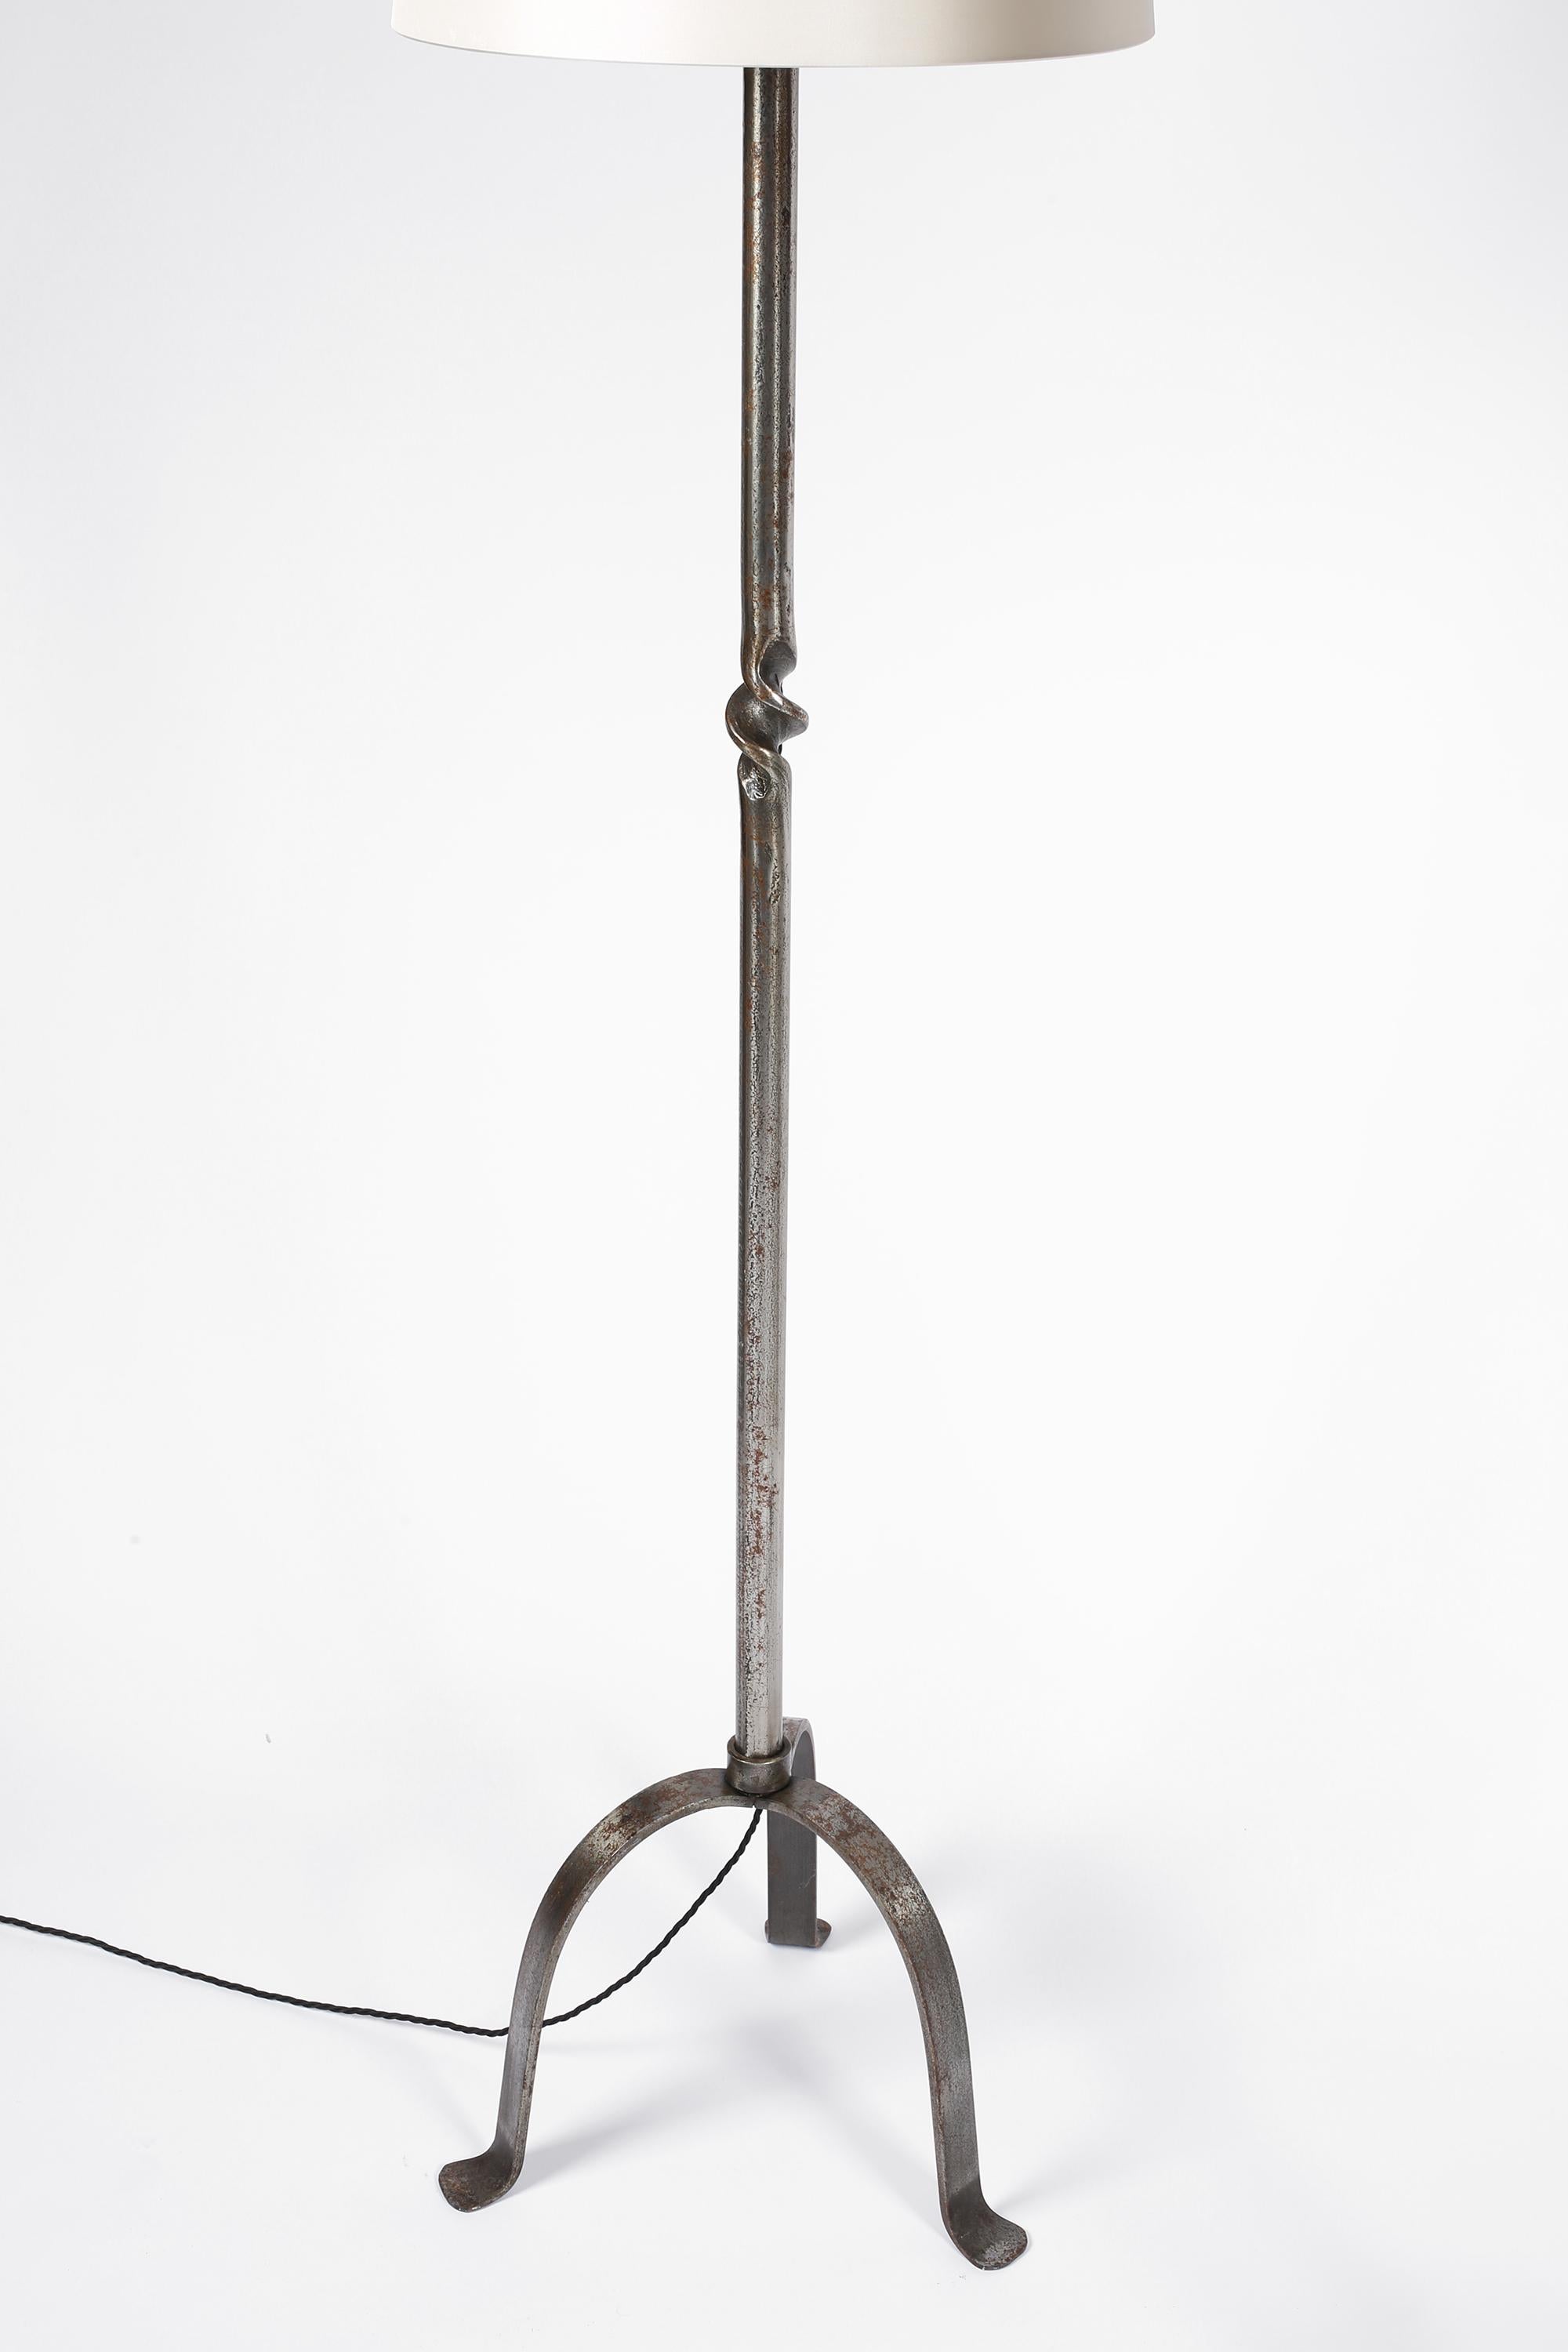 Sold separately.

A pair of simple forged iron floor lamps with subtle torsade detailing to the stems and curved three point bases. The pair differing only in patination to the ironwork. French, c. 1950s. Supplied with off-white dupion silk shades.